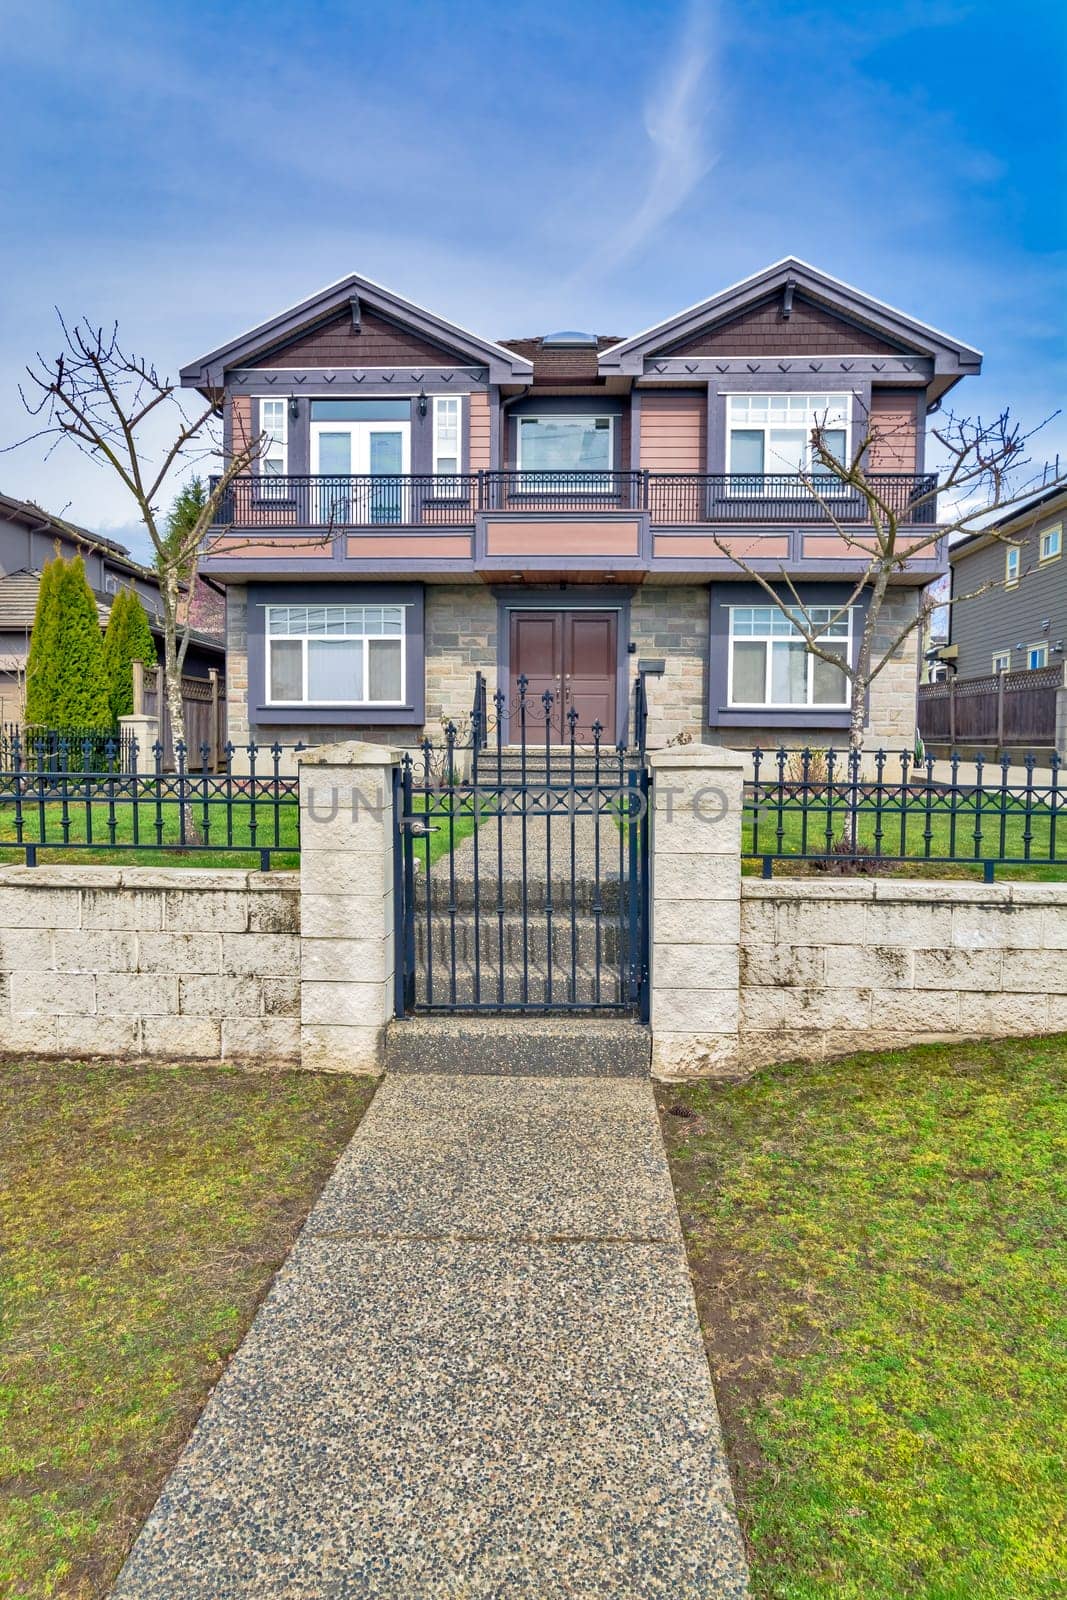 Big residential house with metal fence and gate on winter day in Canada